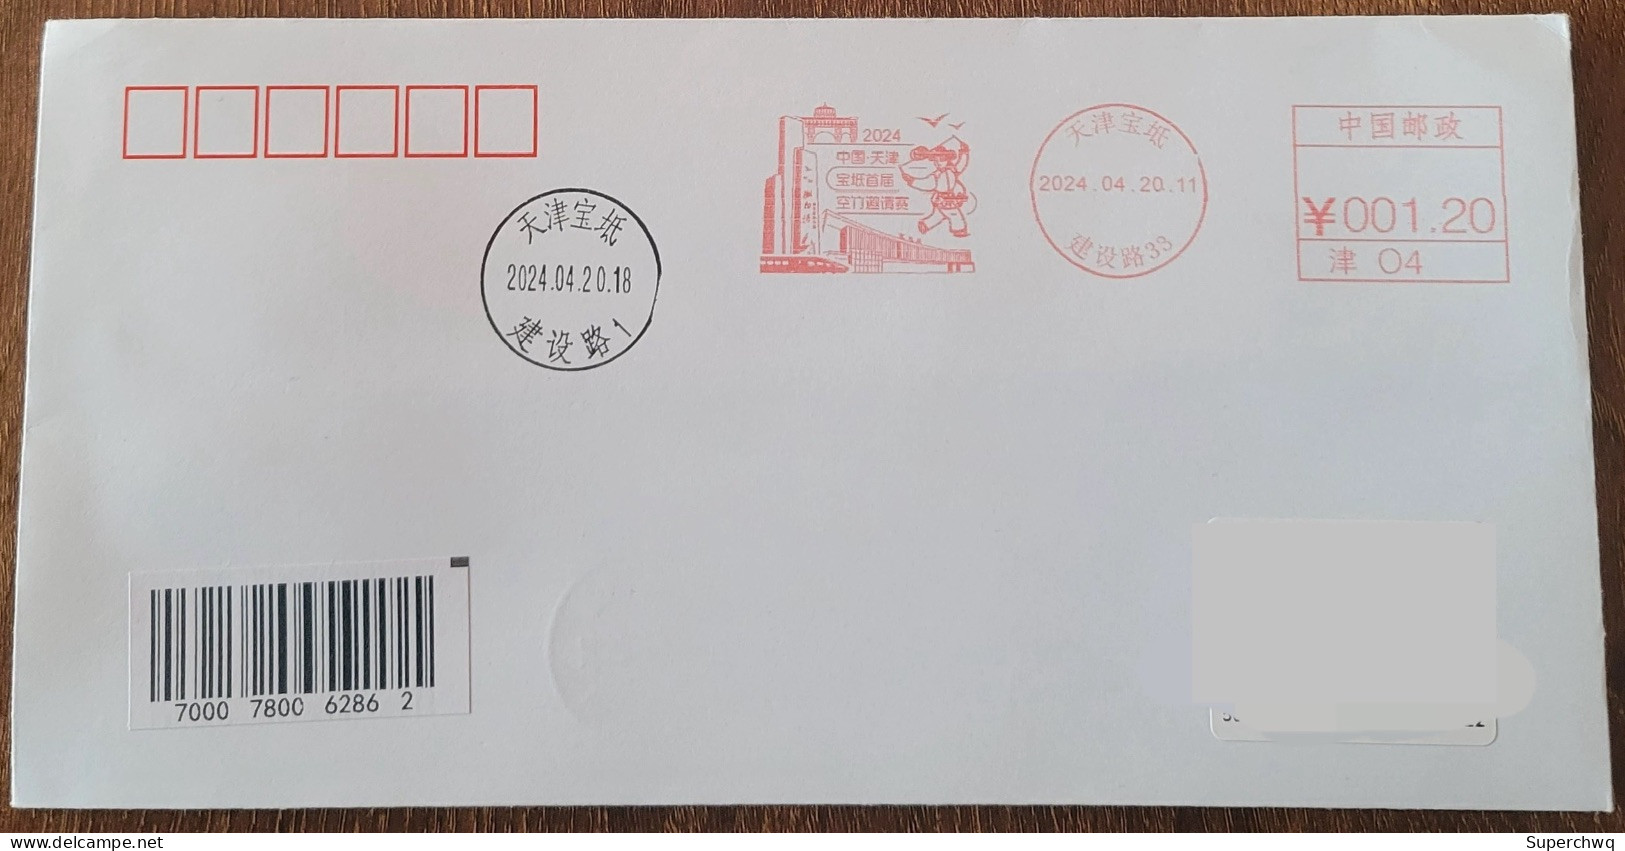 China Cover The First Tianjin Baodi Diabolo Invitational (Tianjin) Was Stamped With Postage On The First Day Of Actual D - Ansichtskarten